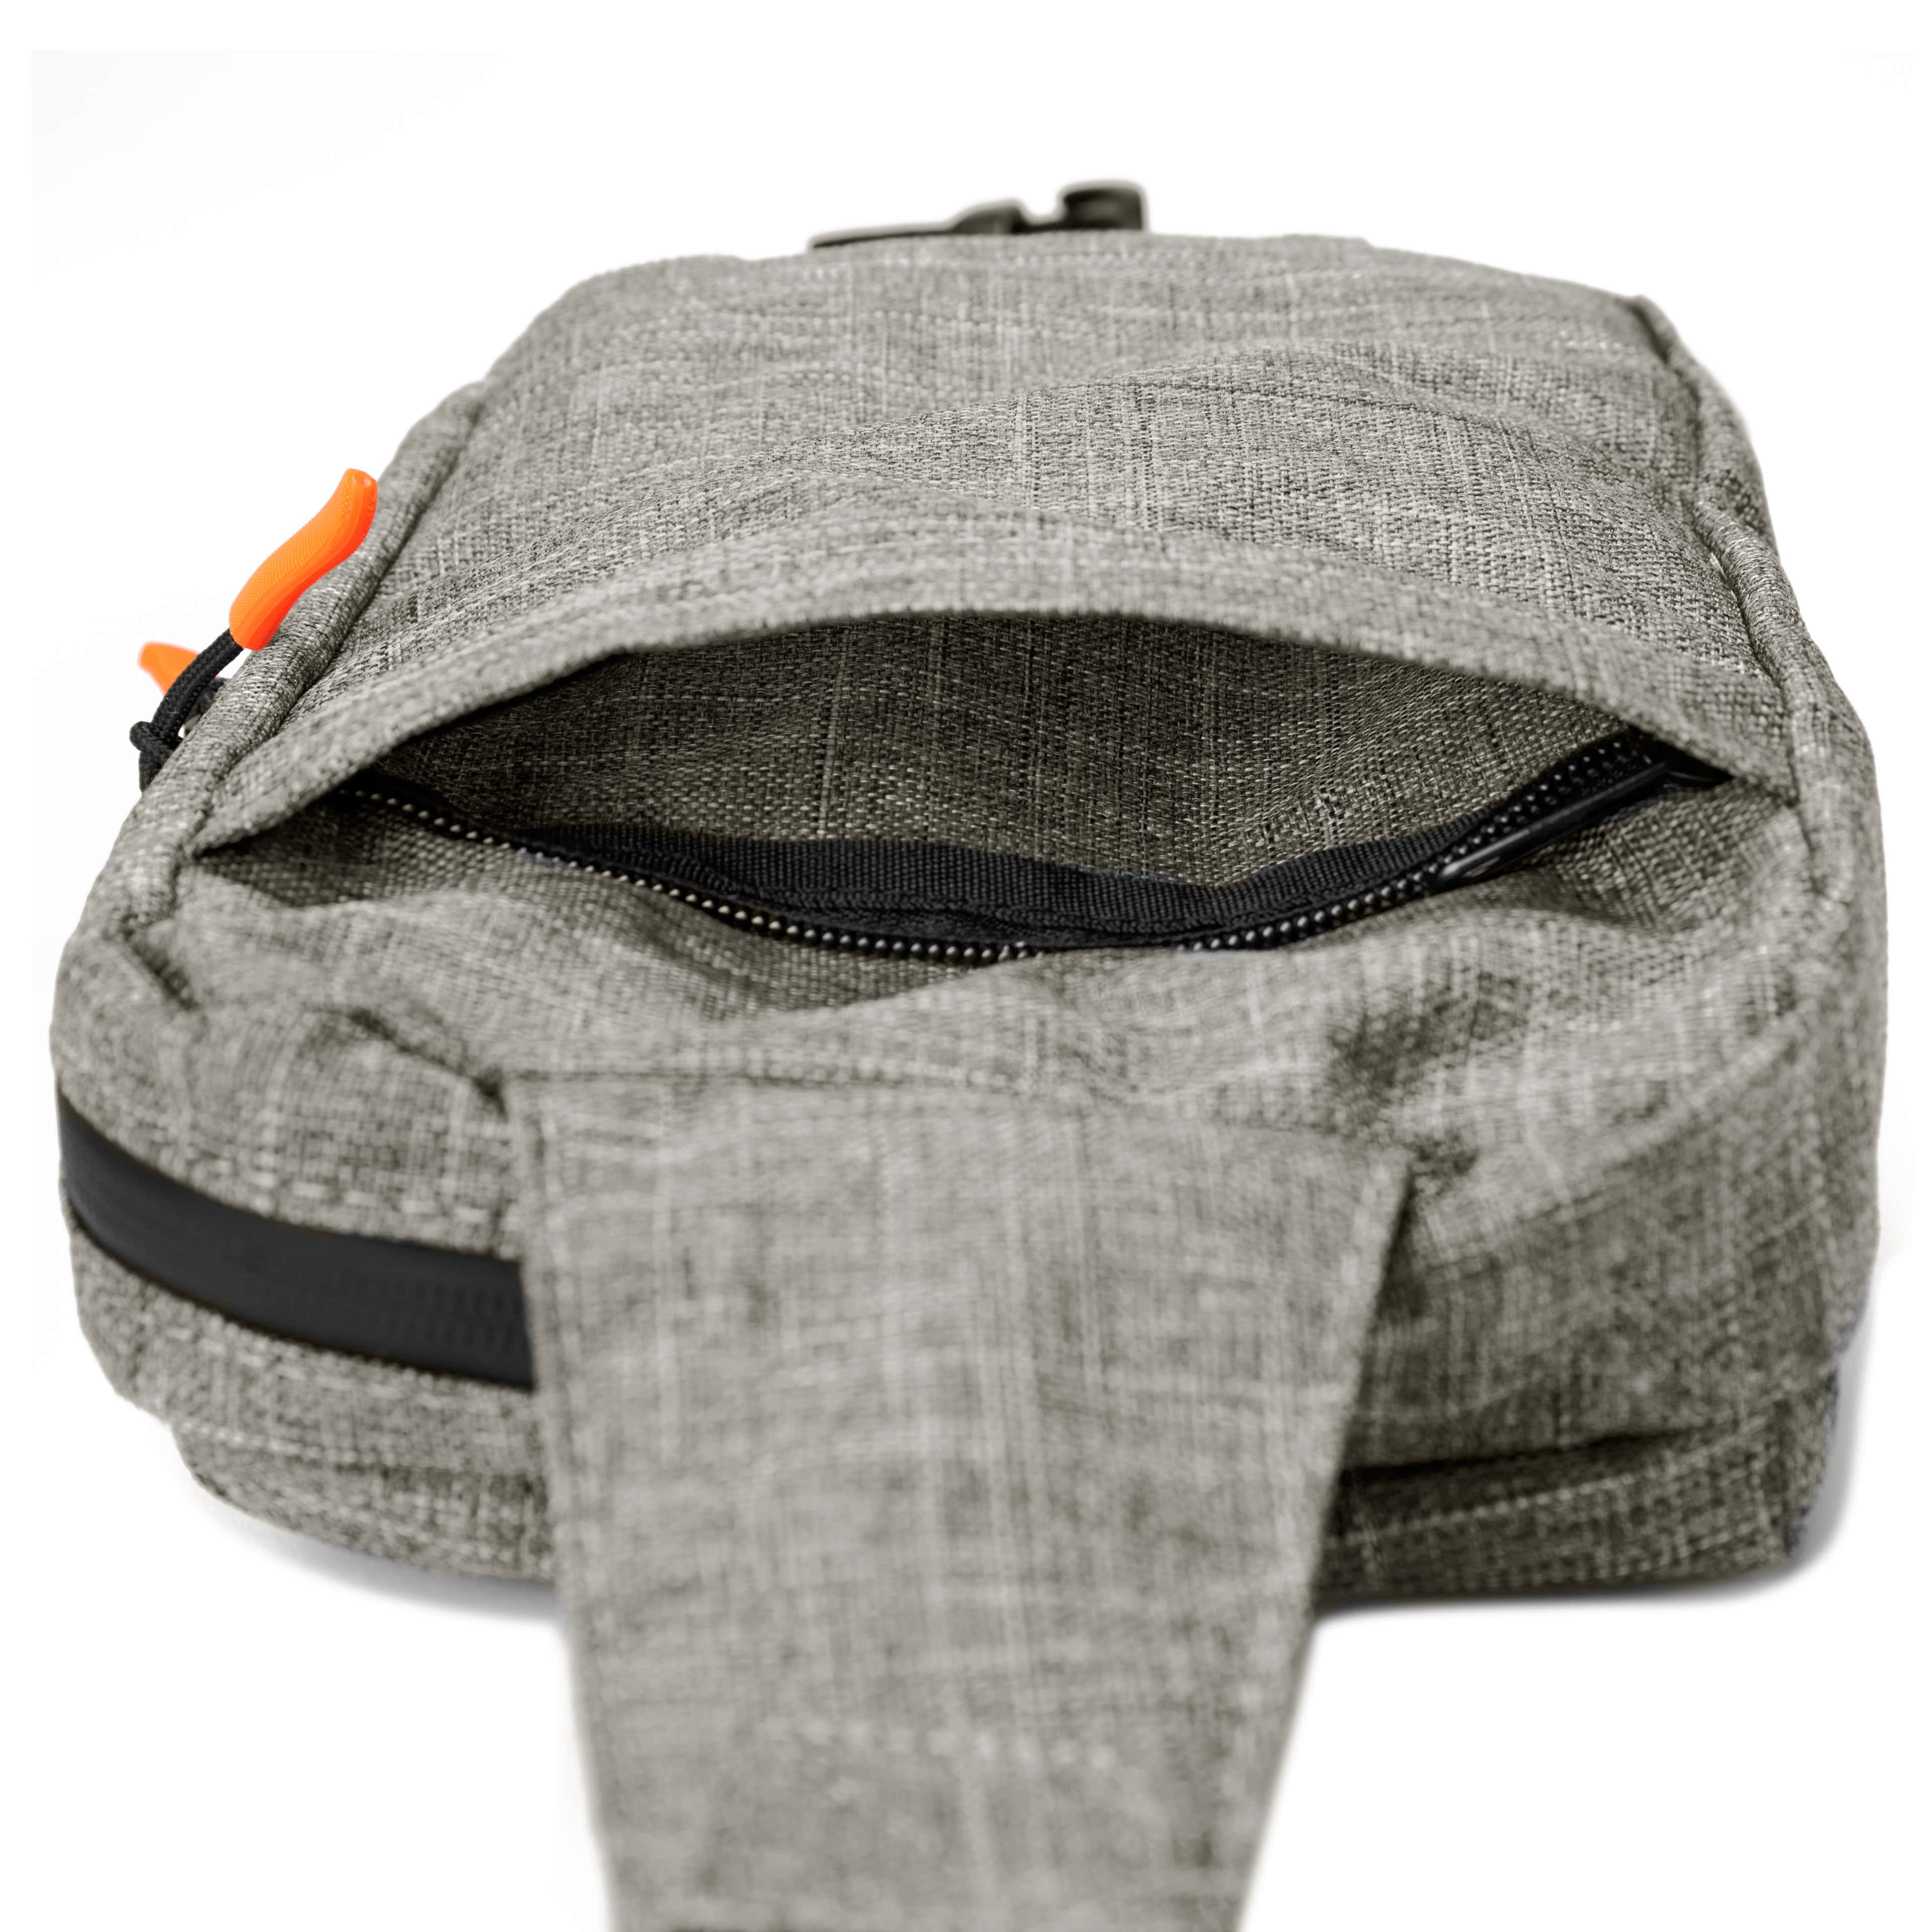 Lawson Grey Foldable Bum Bag – Recycled PET - 12 - gallery